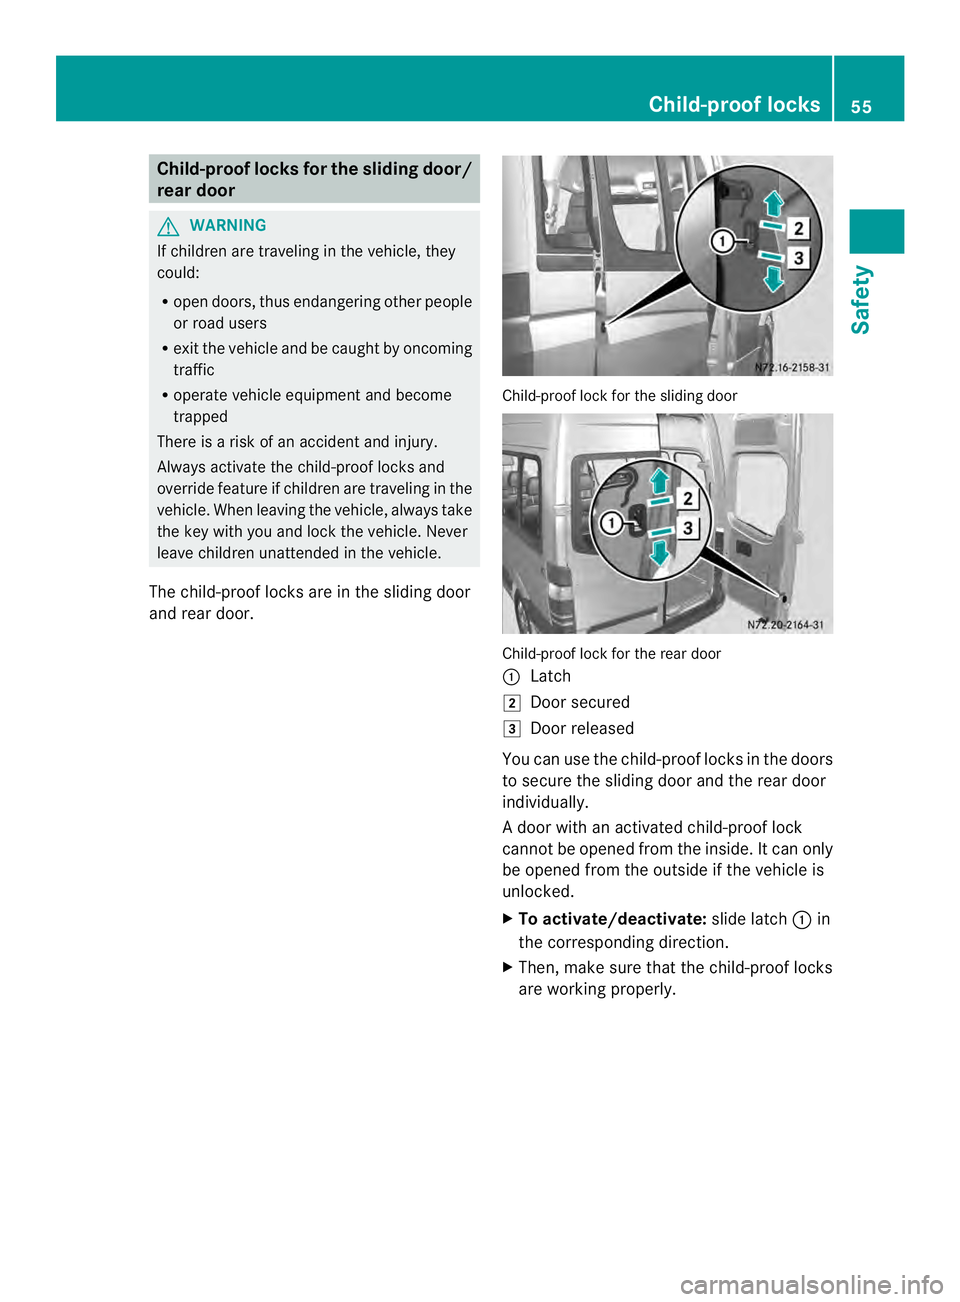 MERCEDES-BENZ SPRINTER 2013  MY13 Operator’s Manual Child-proof locks for the sliding door/
rear door G
WARNING
If childre nare traveling in the vehicle, they
could:
R open doors, thus endangering other people
or road users
R exit the vehicle and be ca